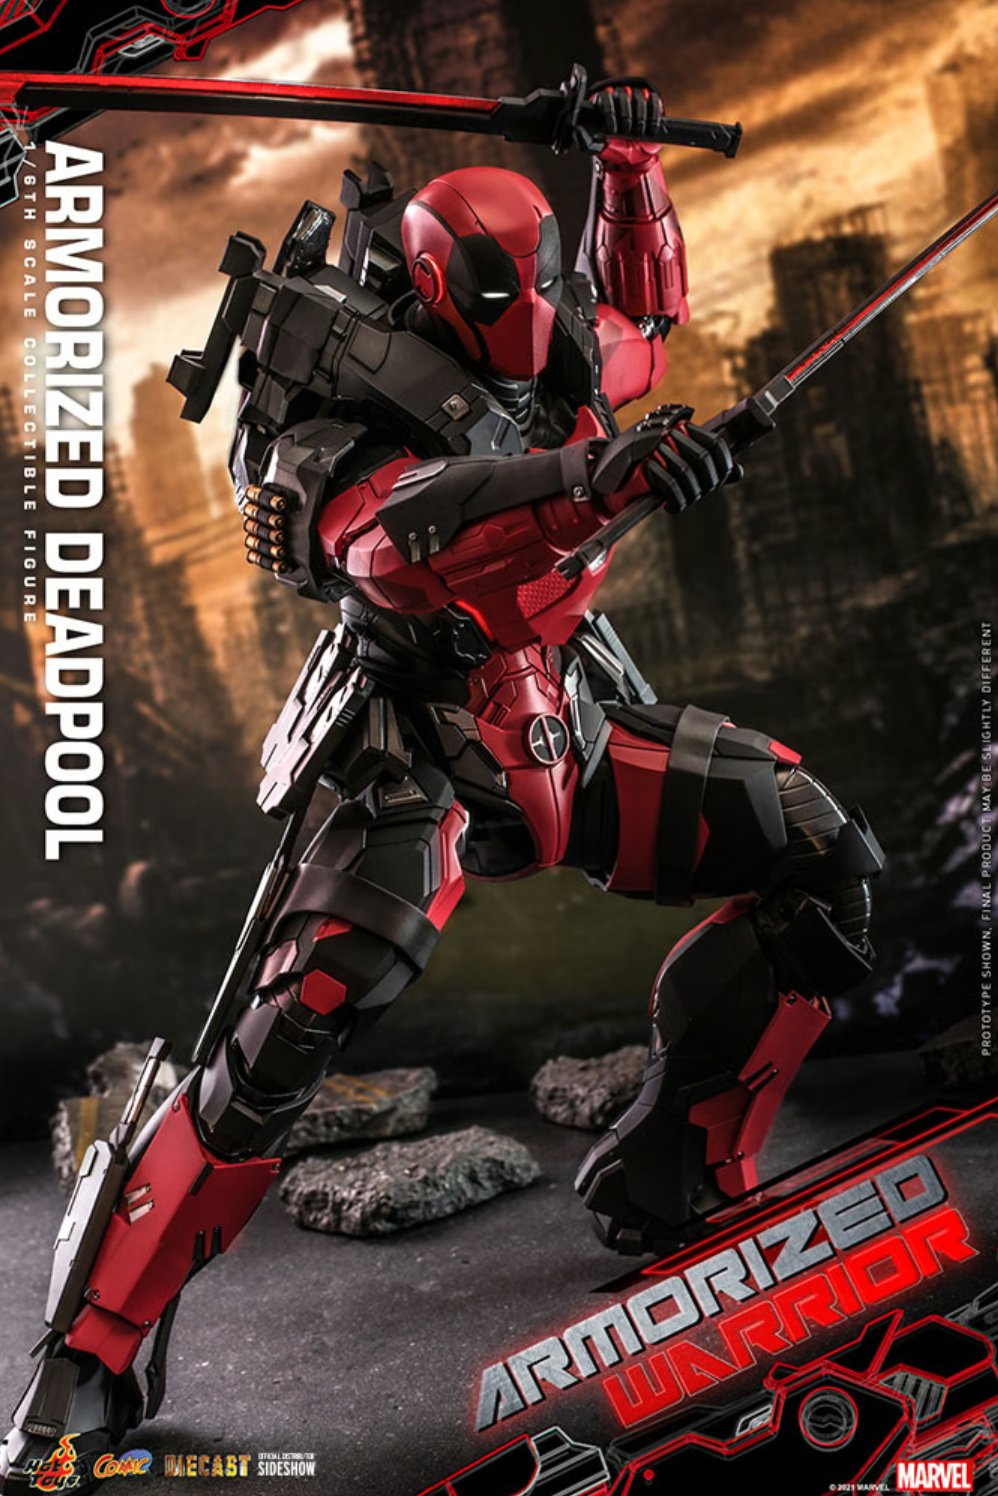 Armorized Deadpool Sixth Scale Collectible Figure by Hot Toys | Sideshow Collectibles - Zombie